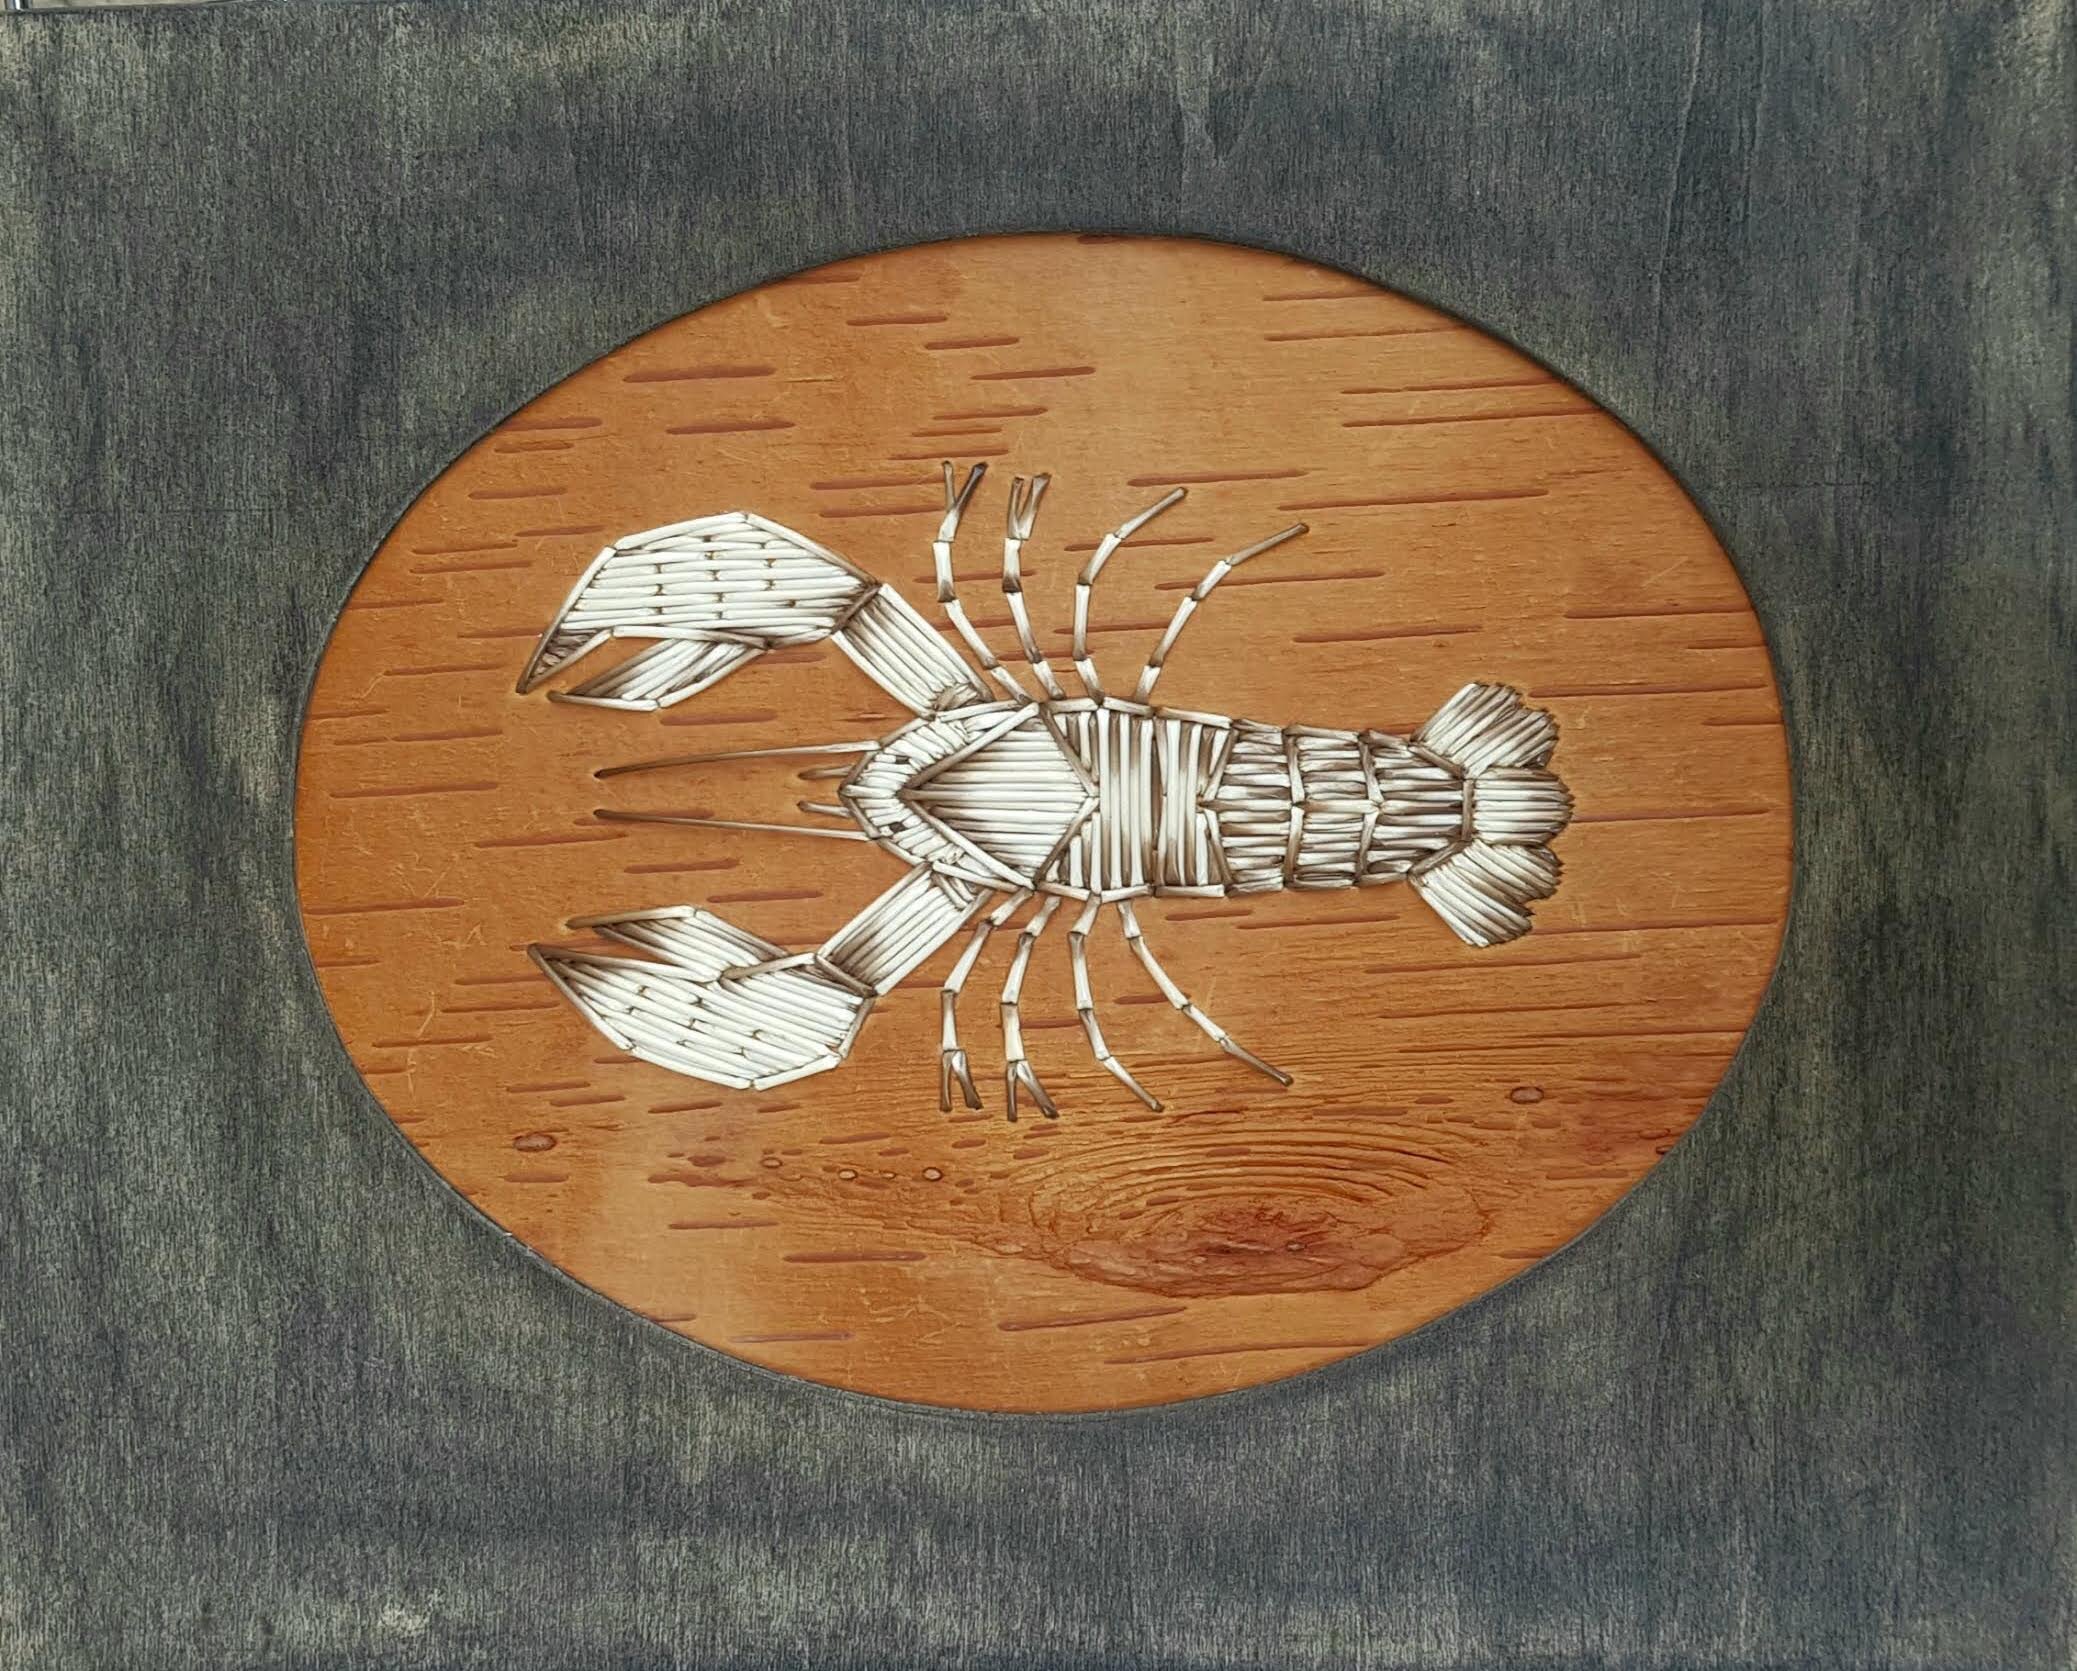 $700.00, French Acadian Lobster- 11"x14",  porcupine quills, birch bark,, wood panel